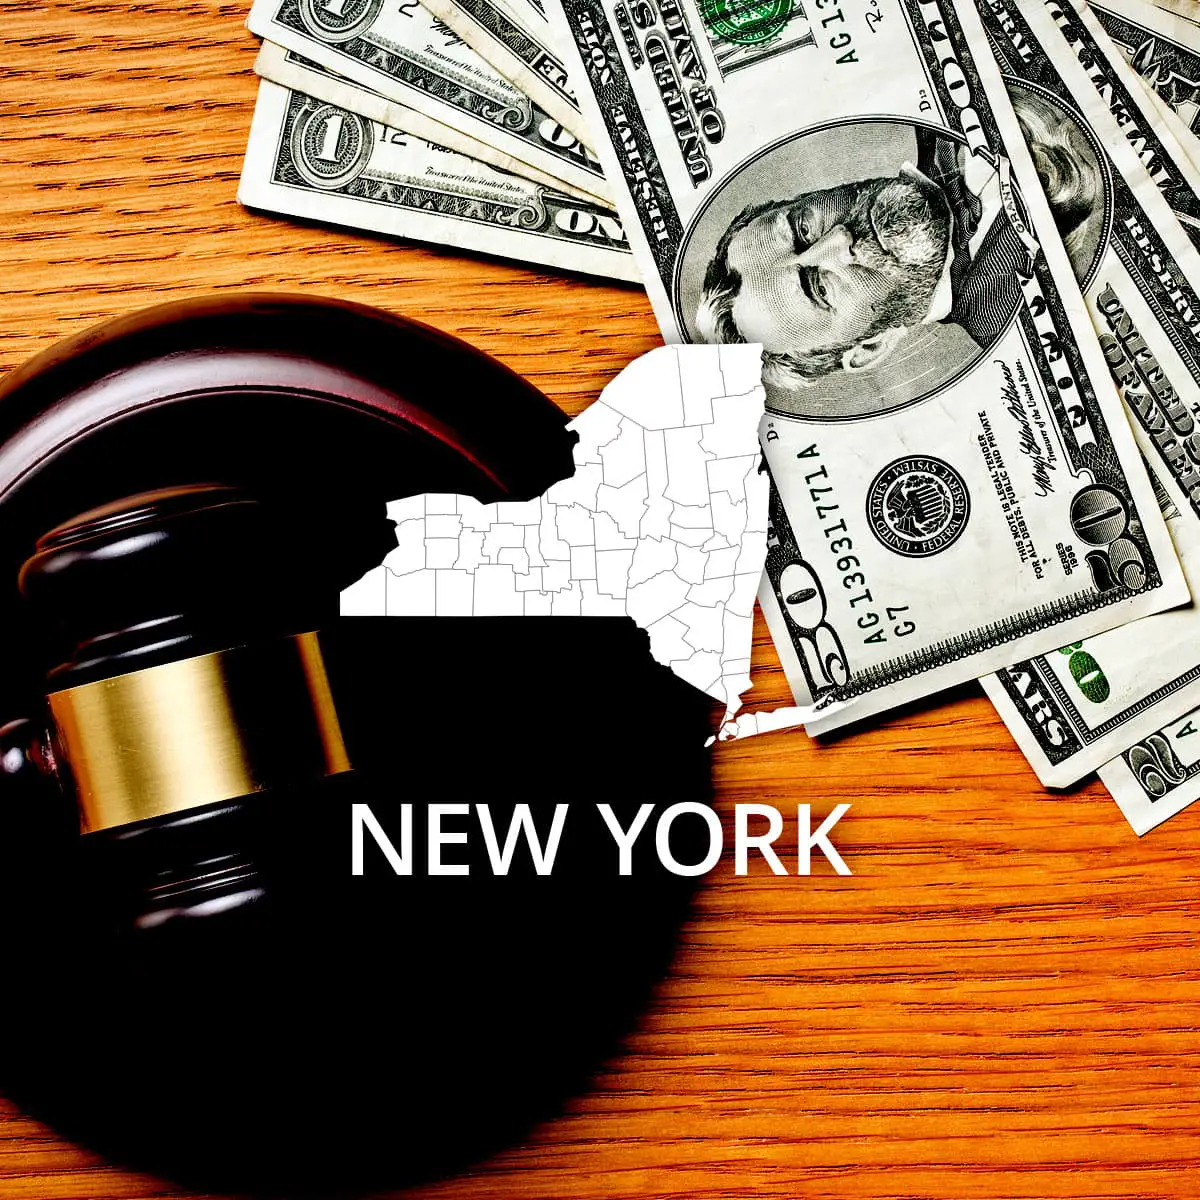 How to File Bankruptcy in New York